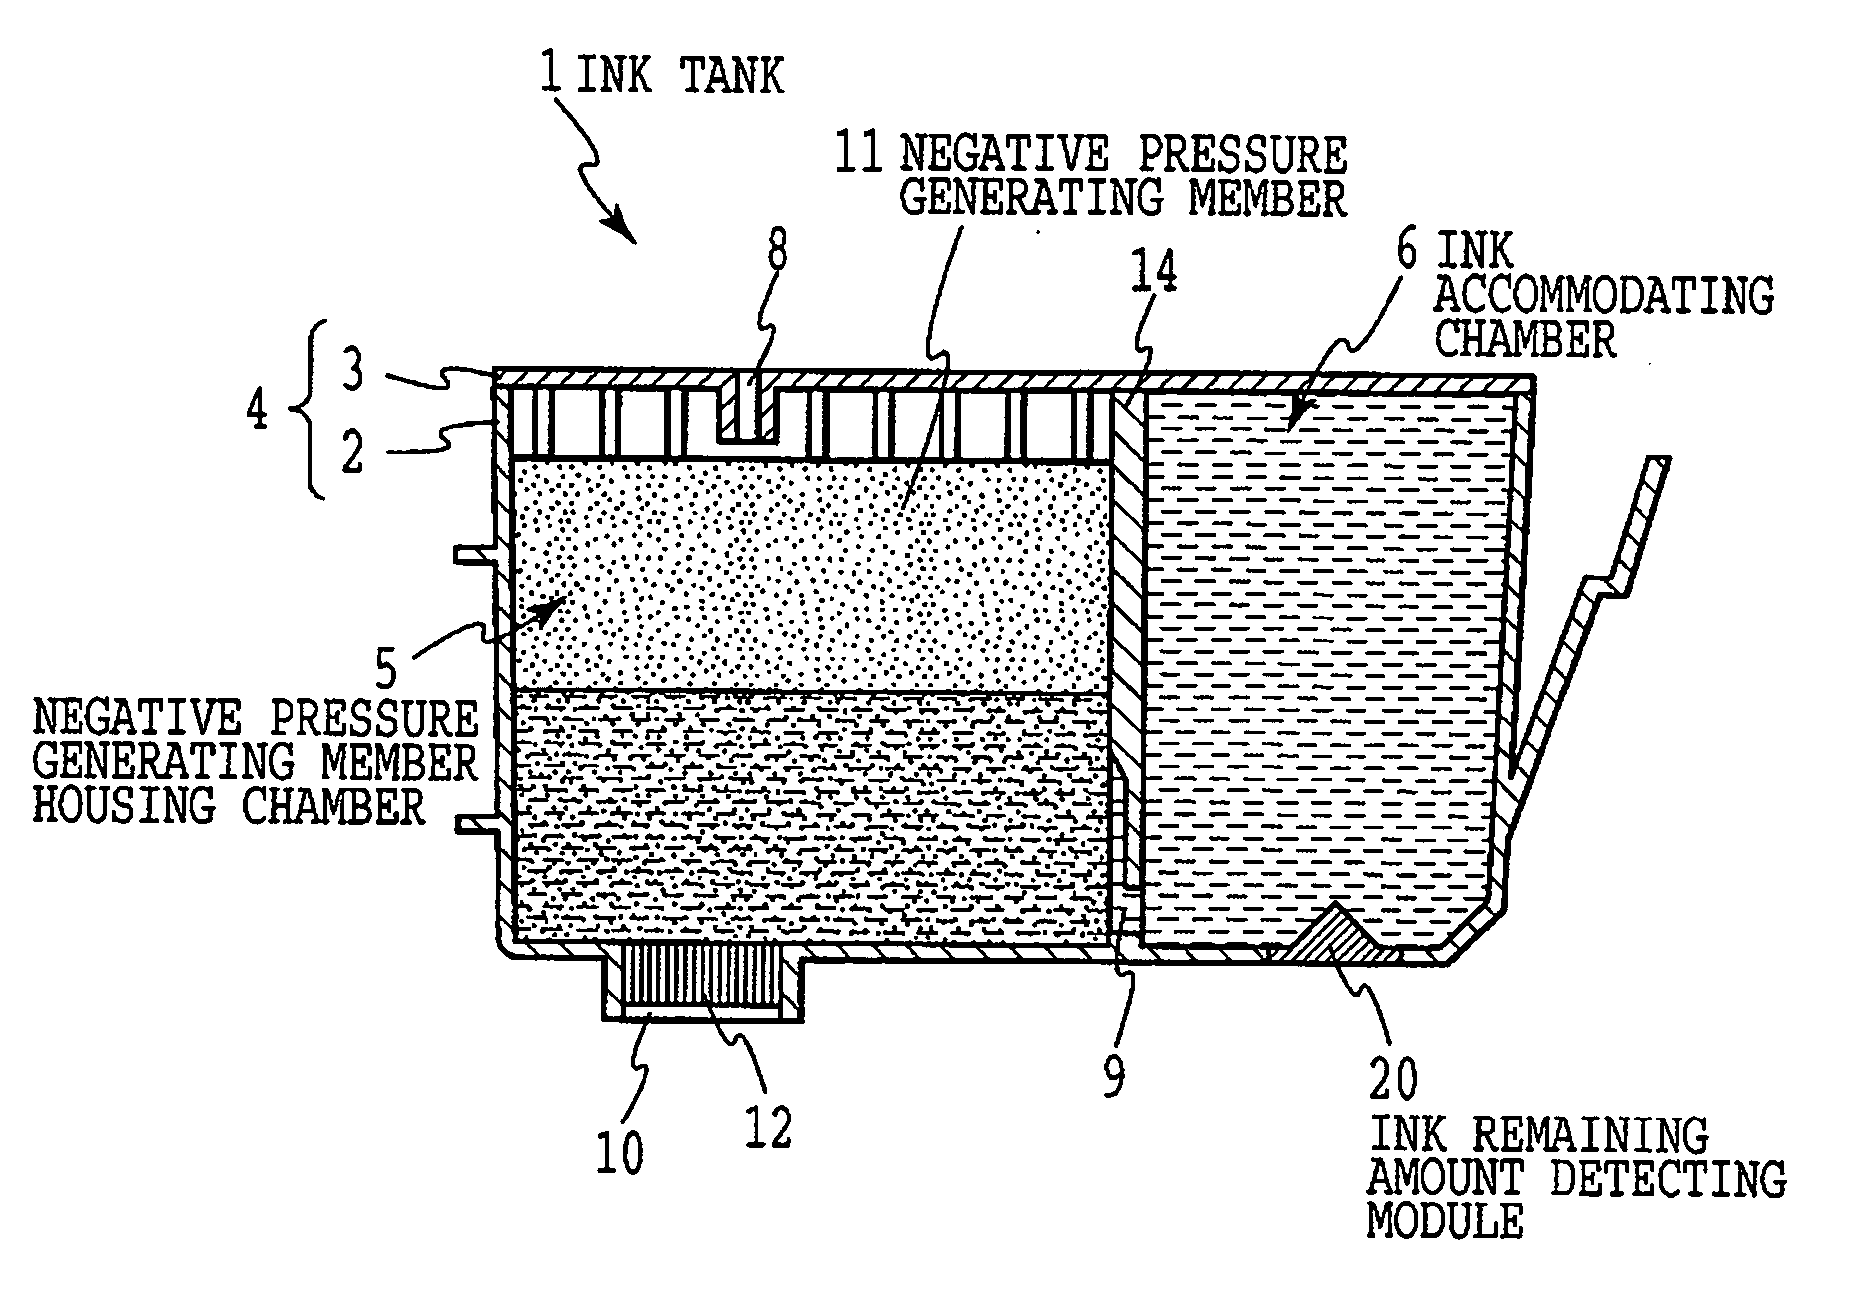 Residual ink amount detection module for ink jet recording, ink tank with the module, and ink jet recording device